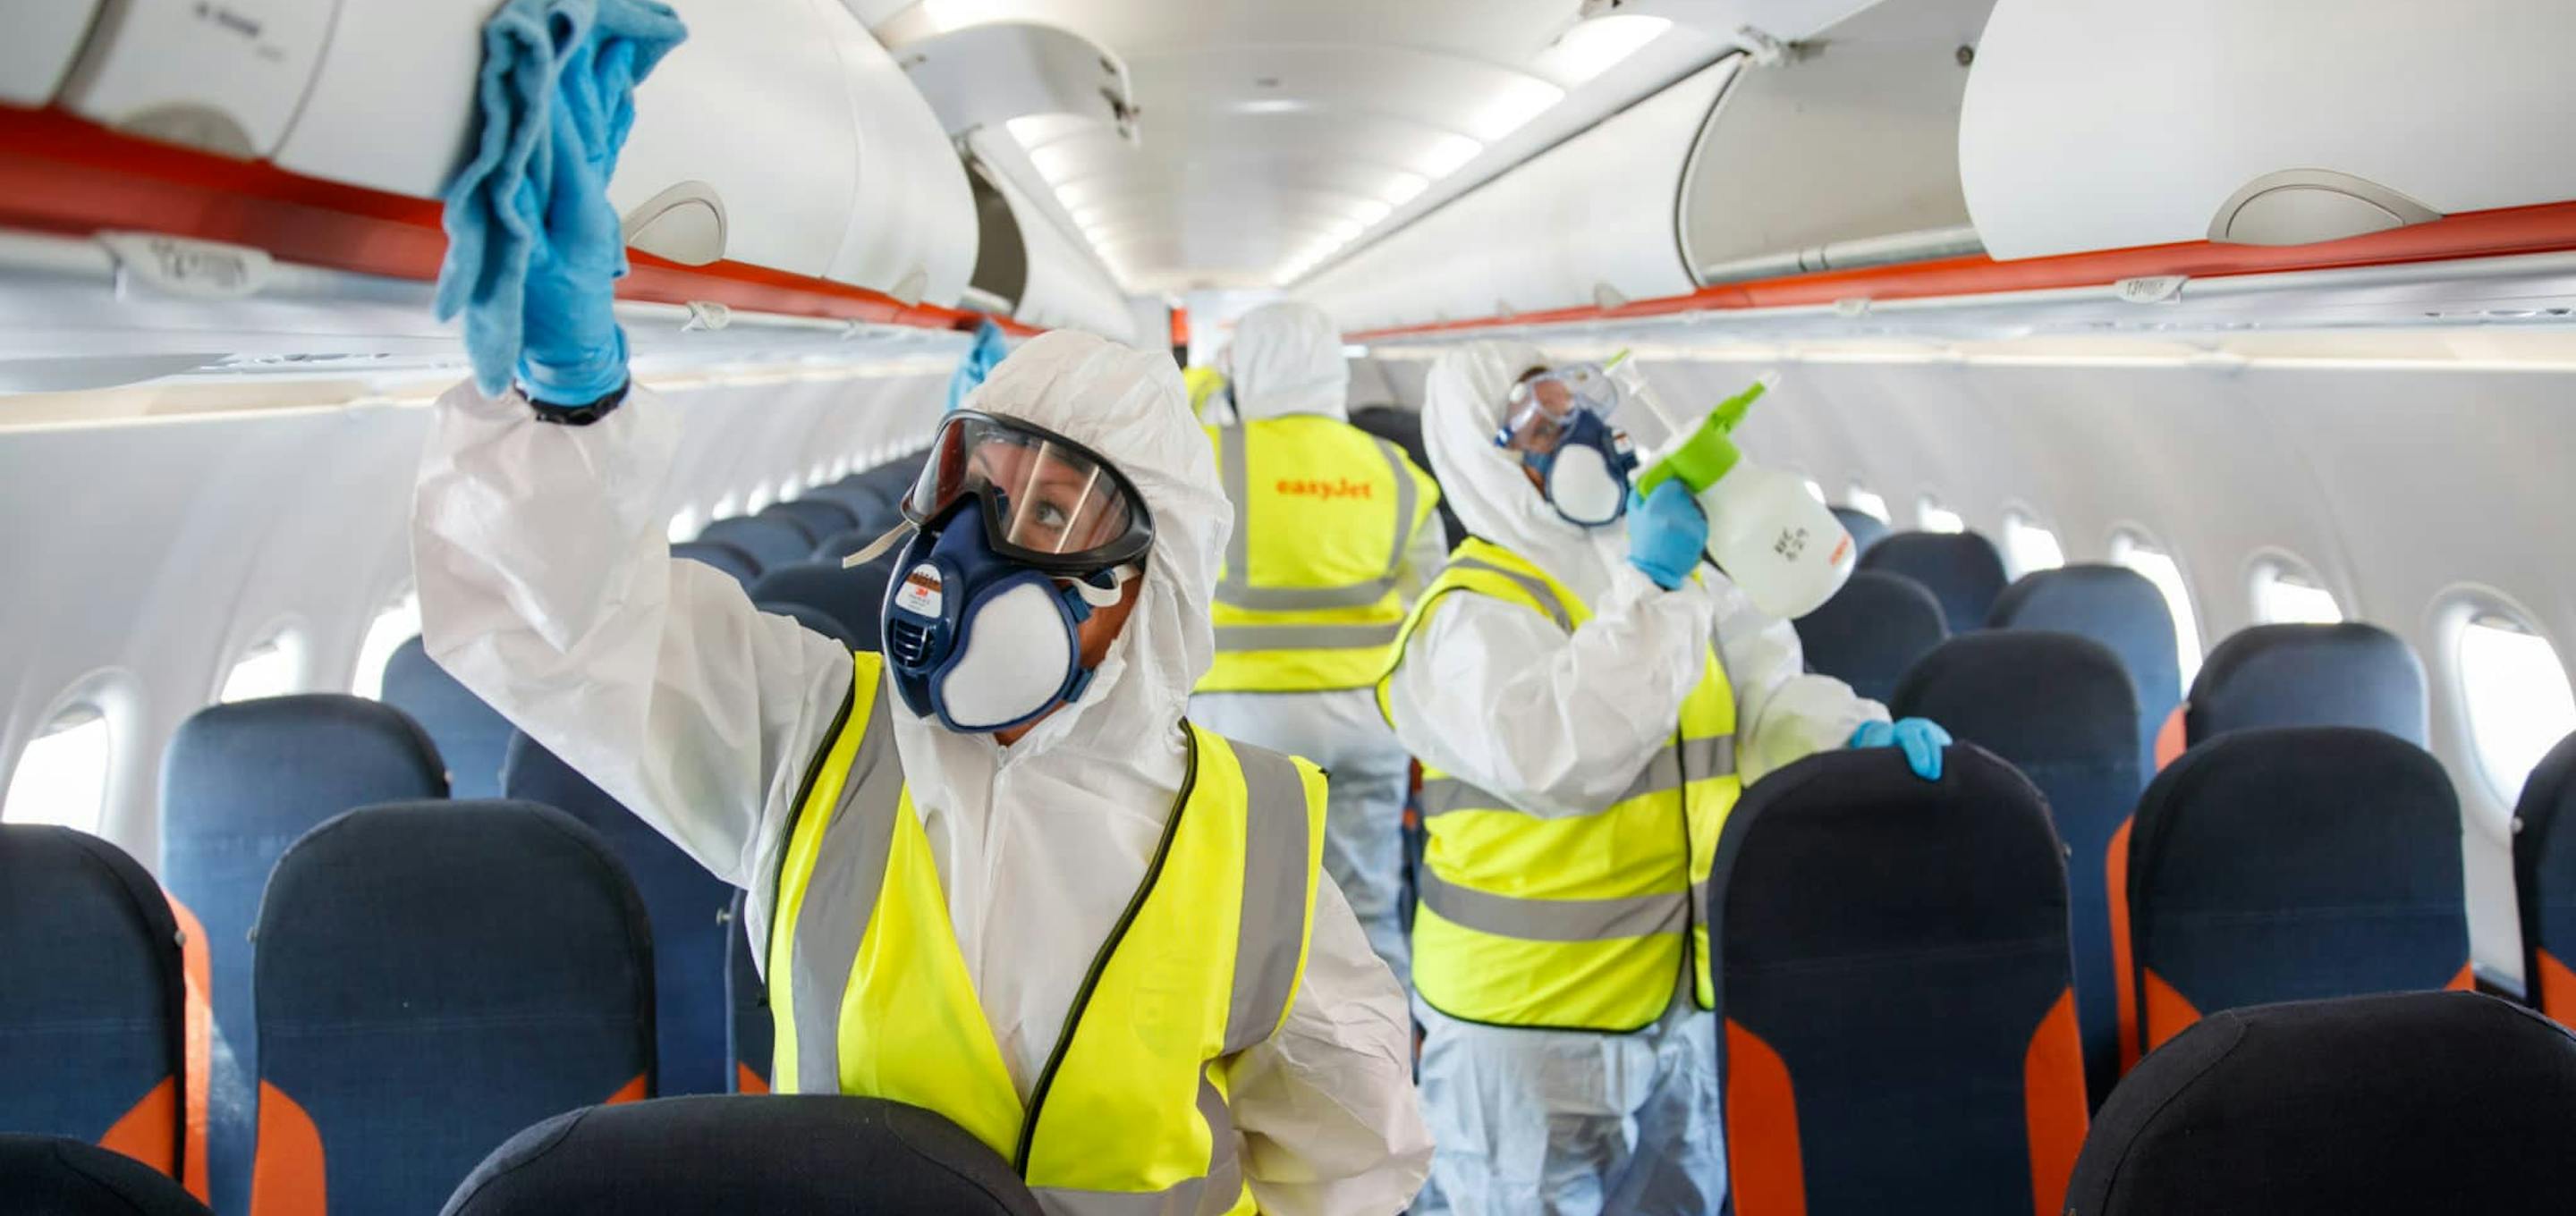 Cleaners disinfecting plane